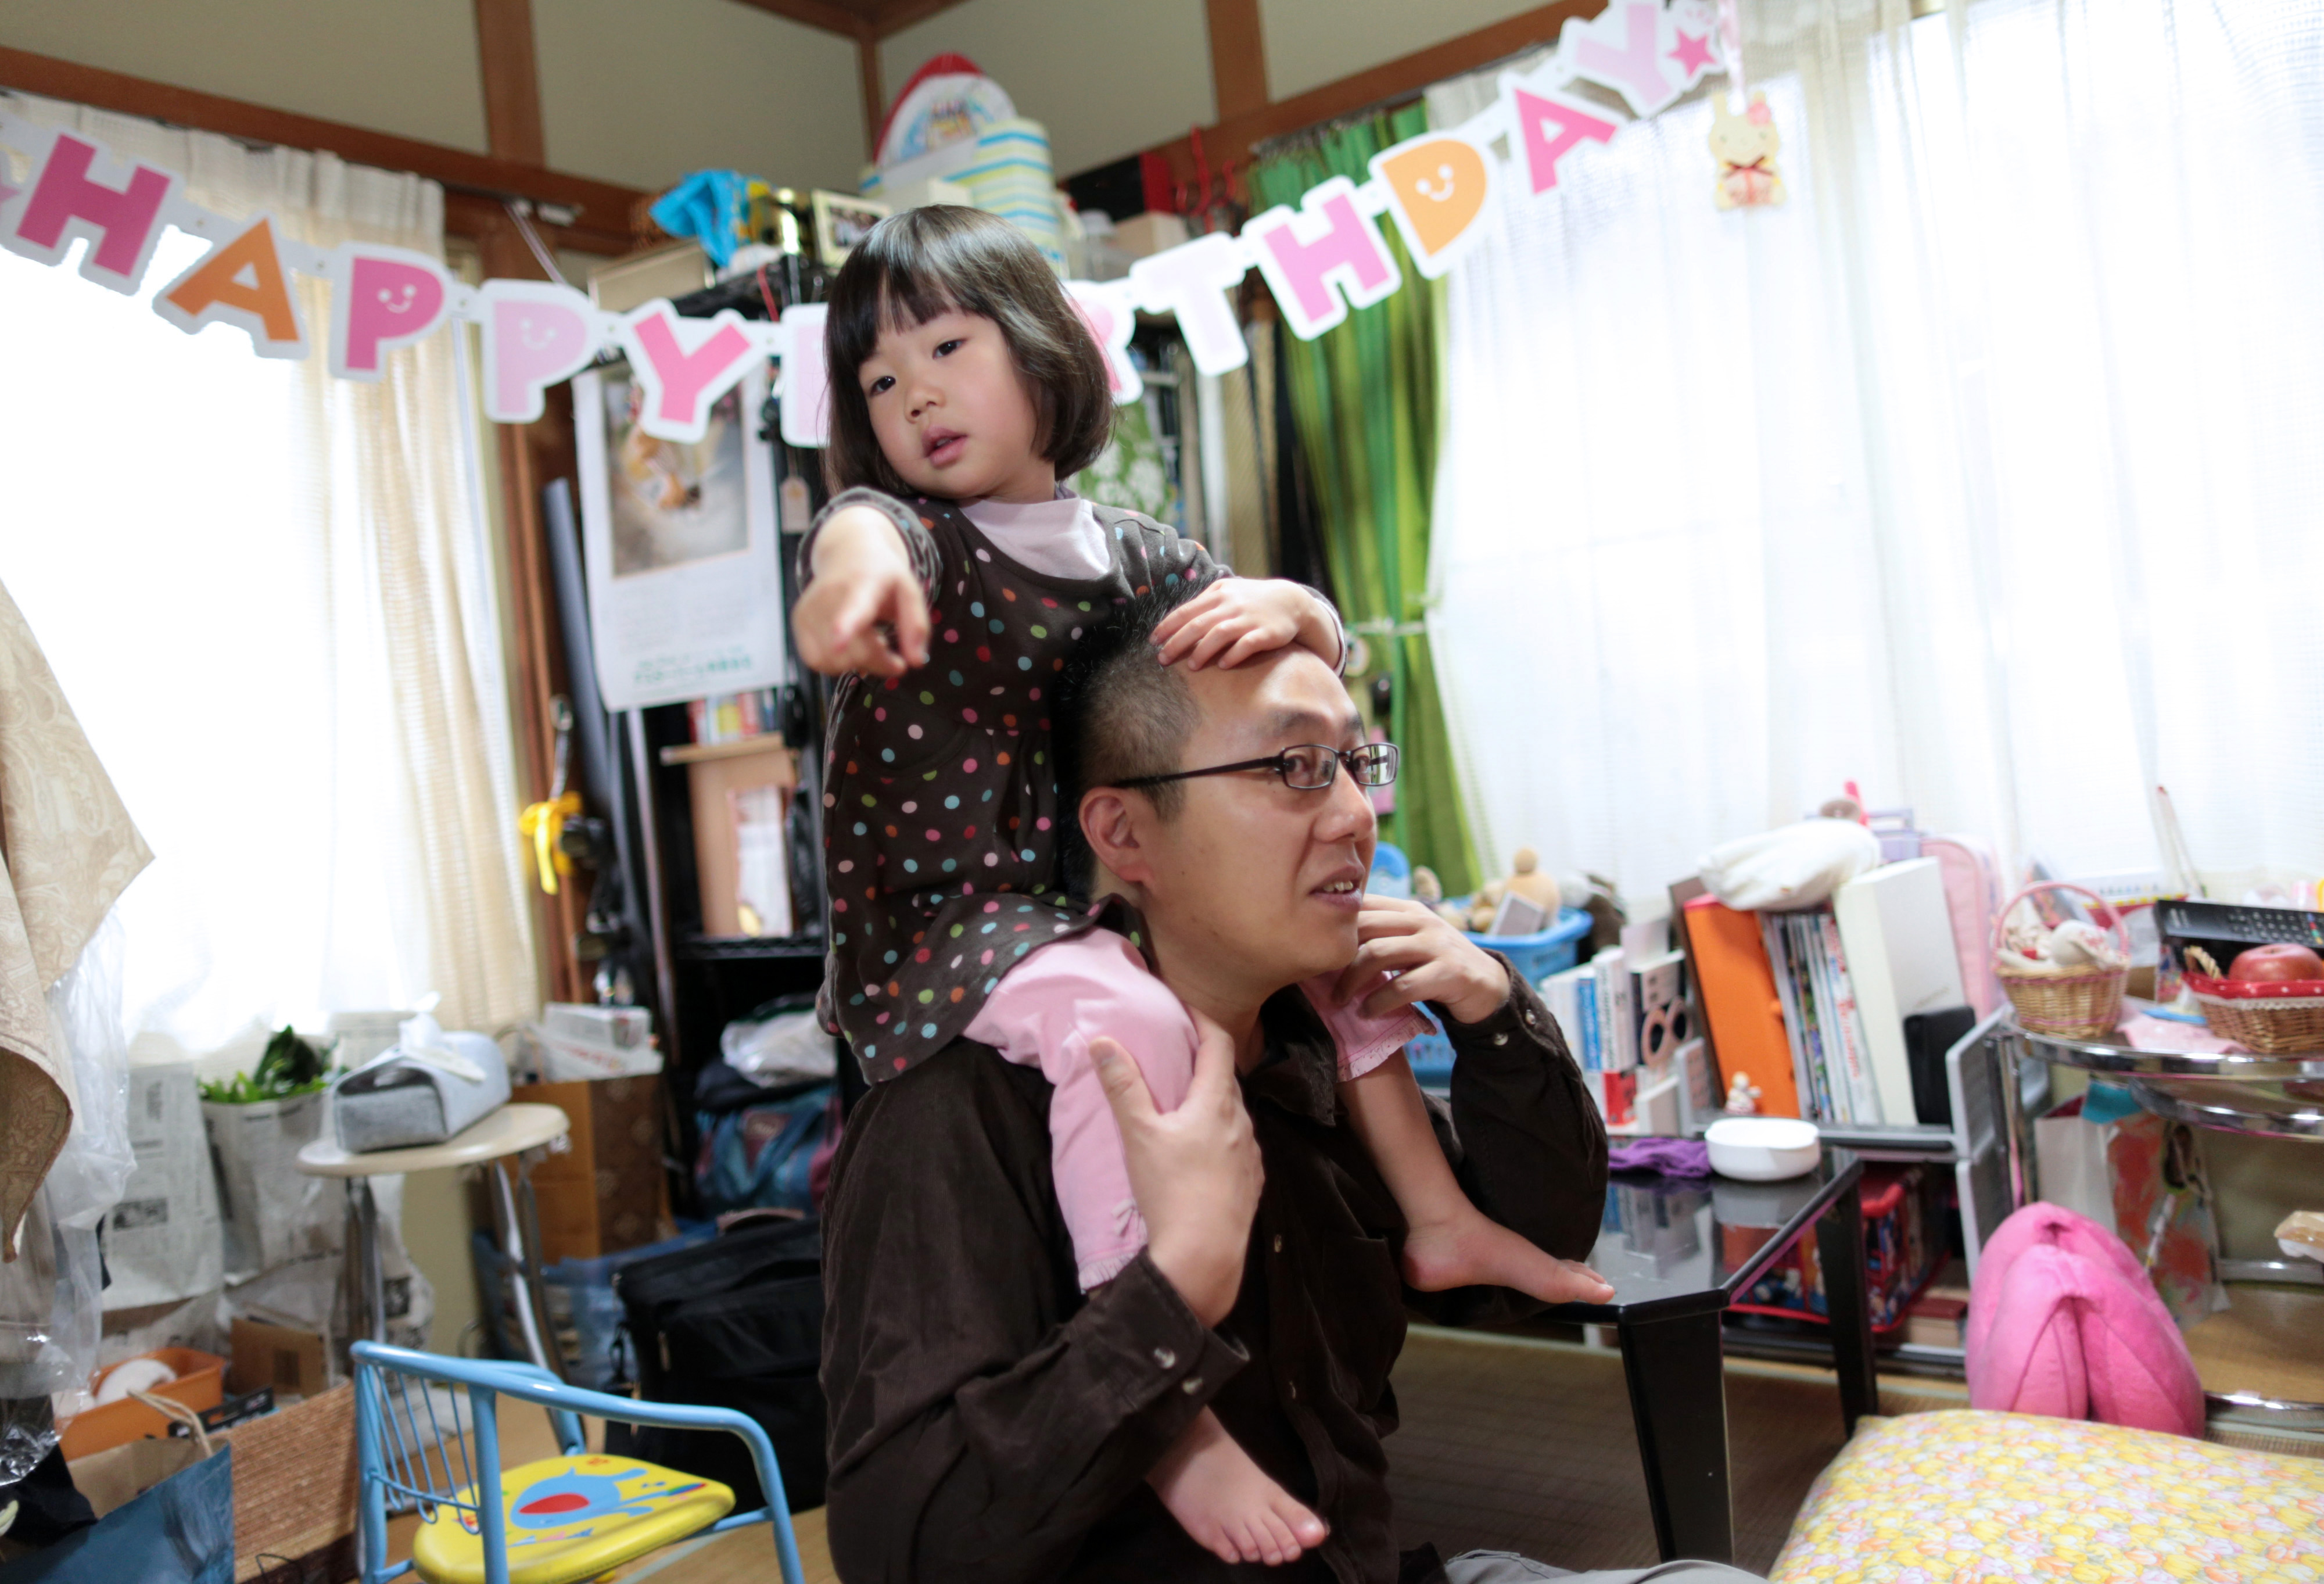 Kazunori Nagai, an Internet media firm manager who is finding it difficult to take paternity leave, spends some rare quality time with his 4-year-old daughter at home in Tokyo on March 2. | BLOOMBERG